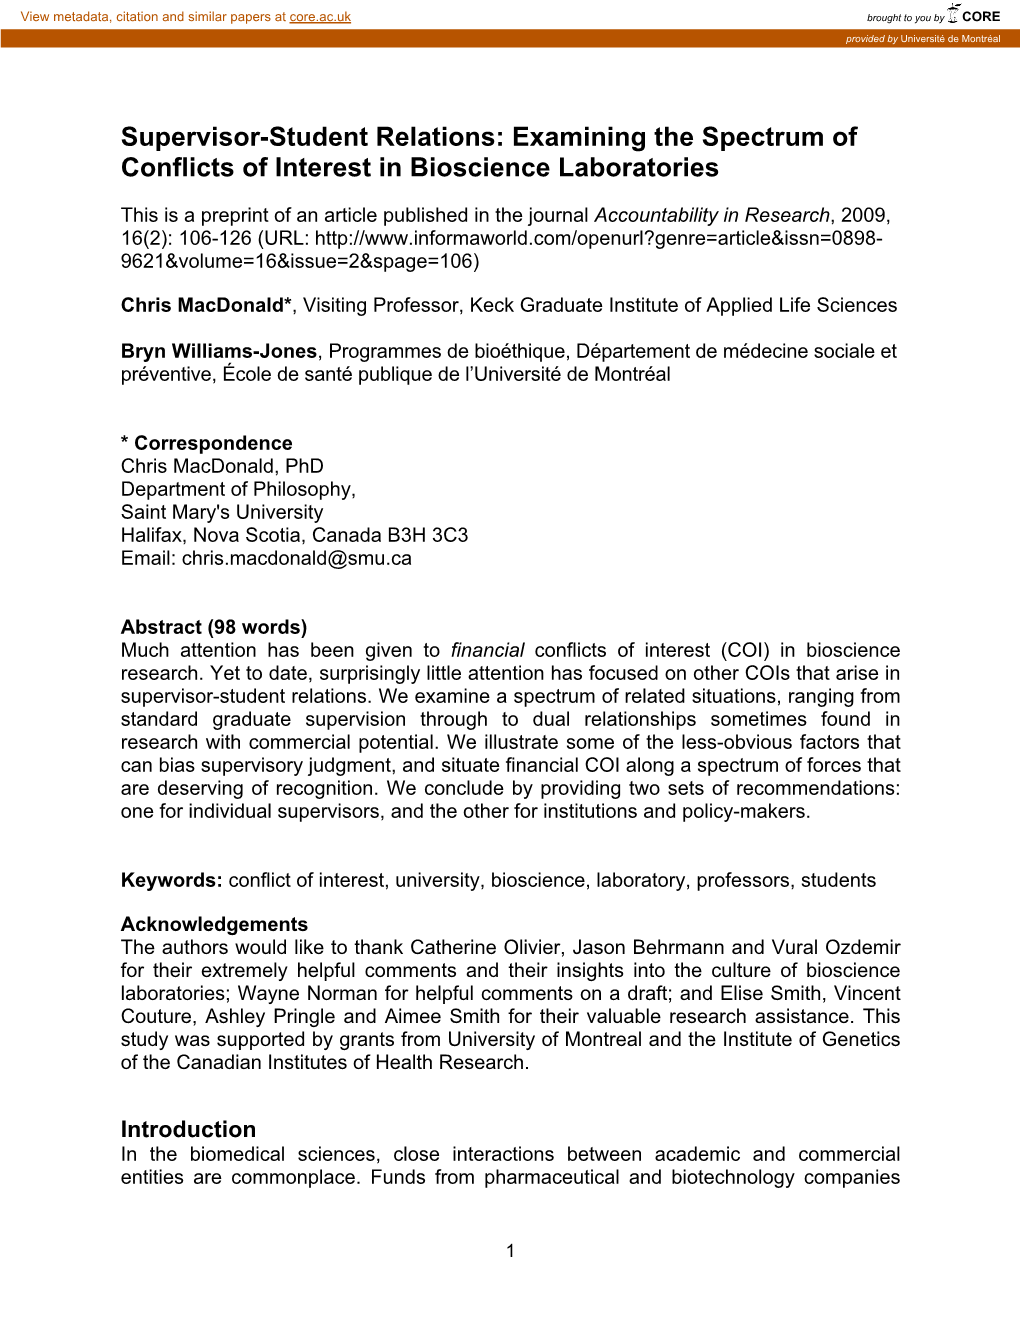 Supervisor-Student Relations: Examining the Spectrum of Conflicts of Interest in Bioscience Laboratories